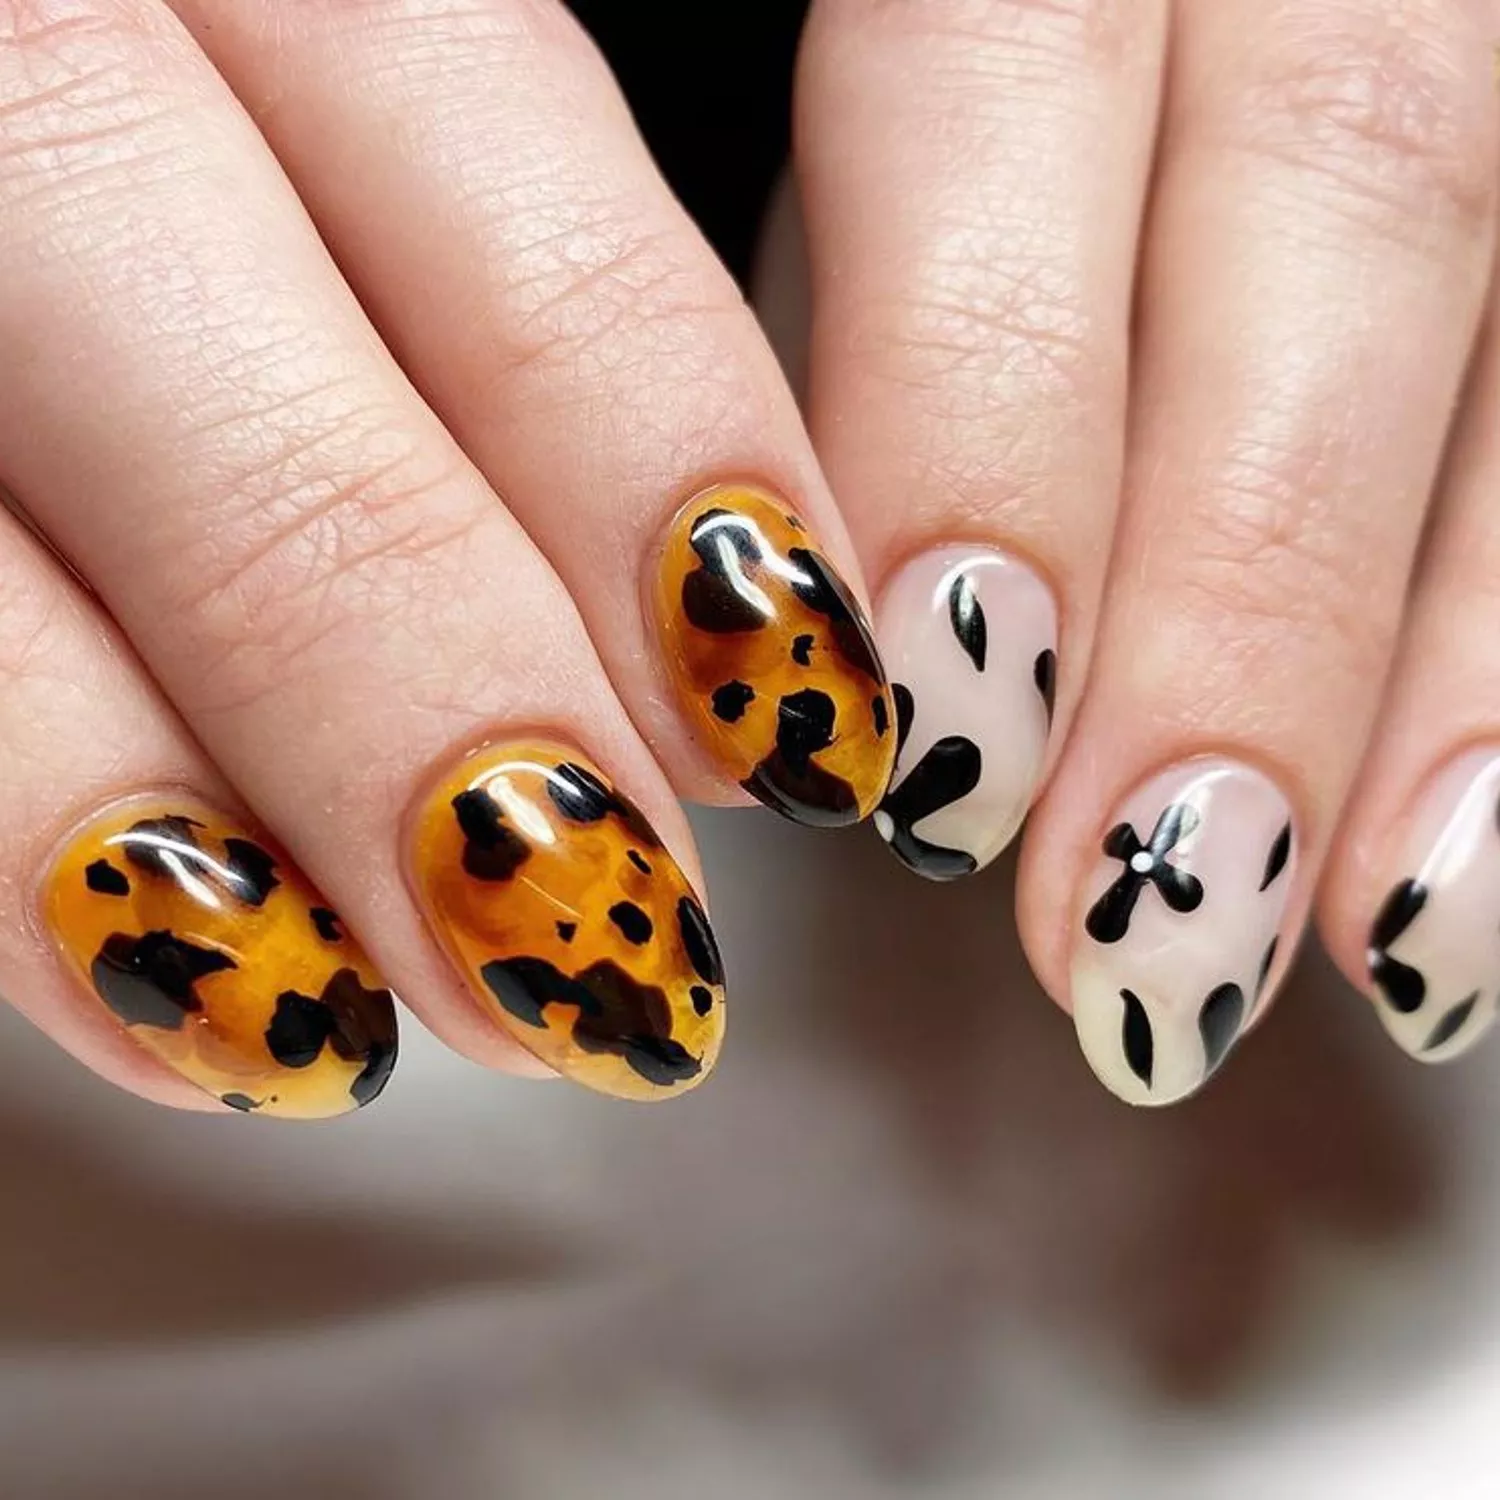 Manicure with tortoiseshell design on one hand and floral design on the other